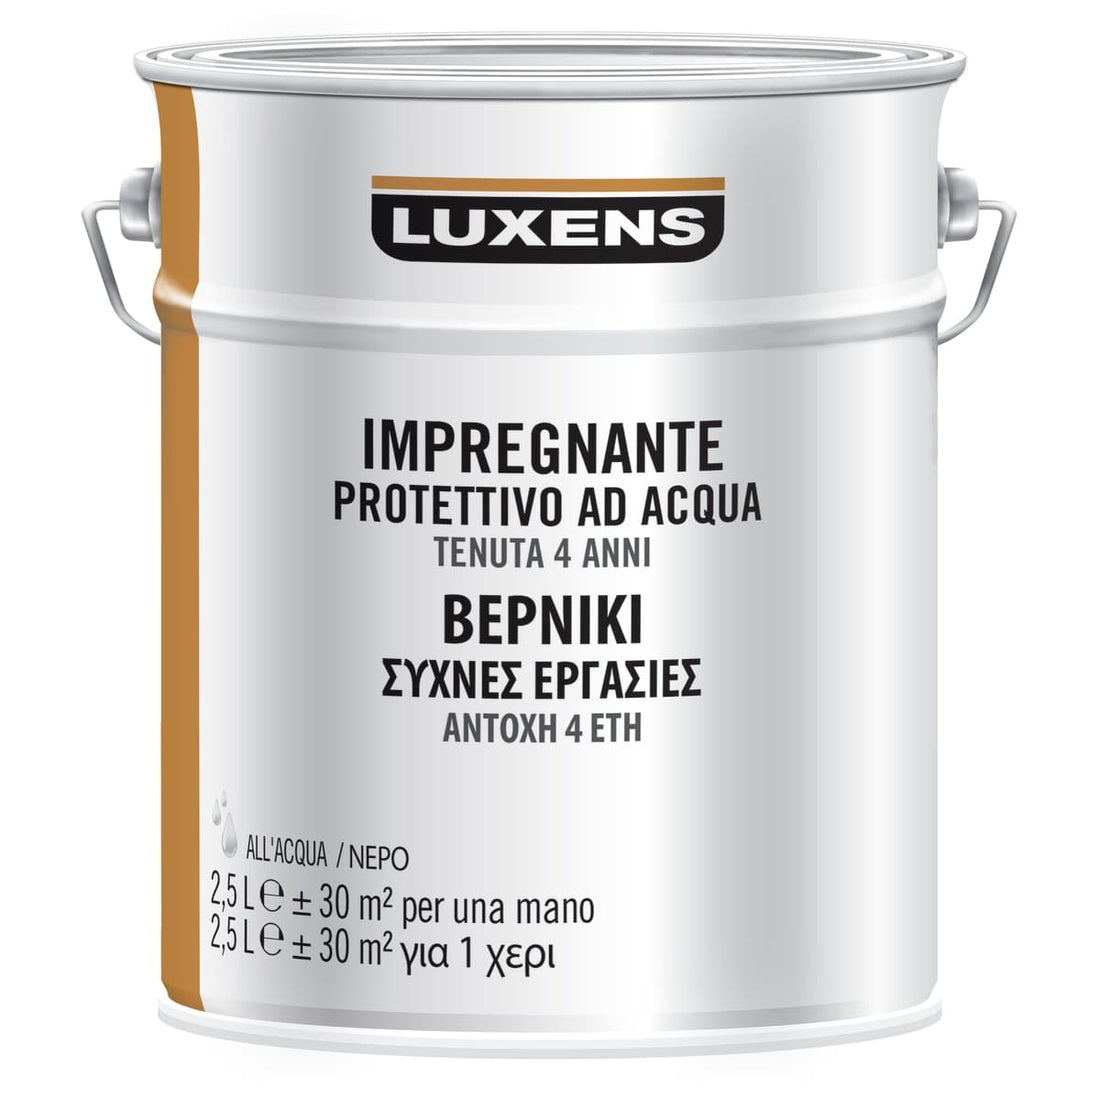 COLOURLESS WATER-BASED IMPREGNATING AGENT 2.5 L LUXENS - best price from Maltashopper.com BR470001947